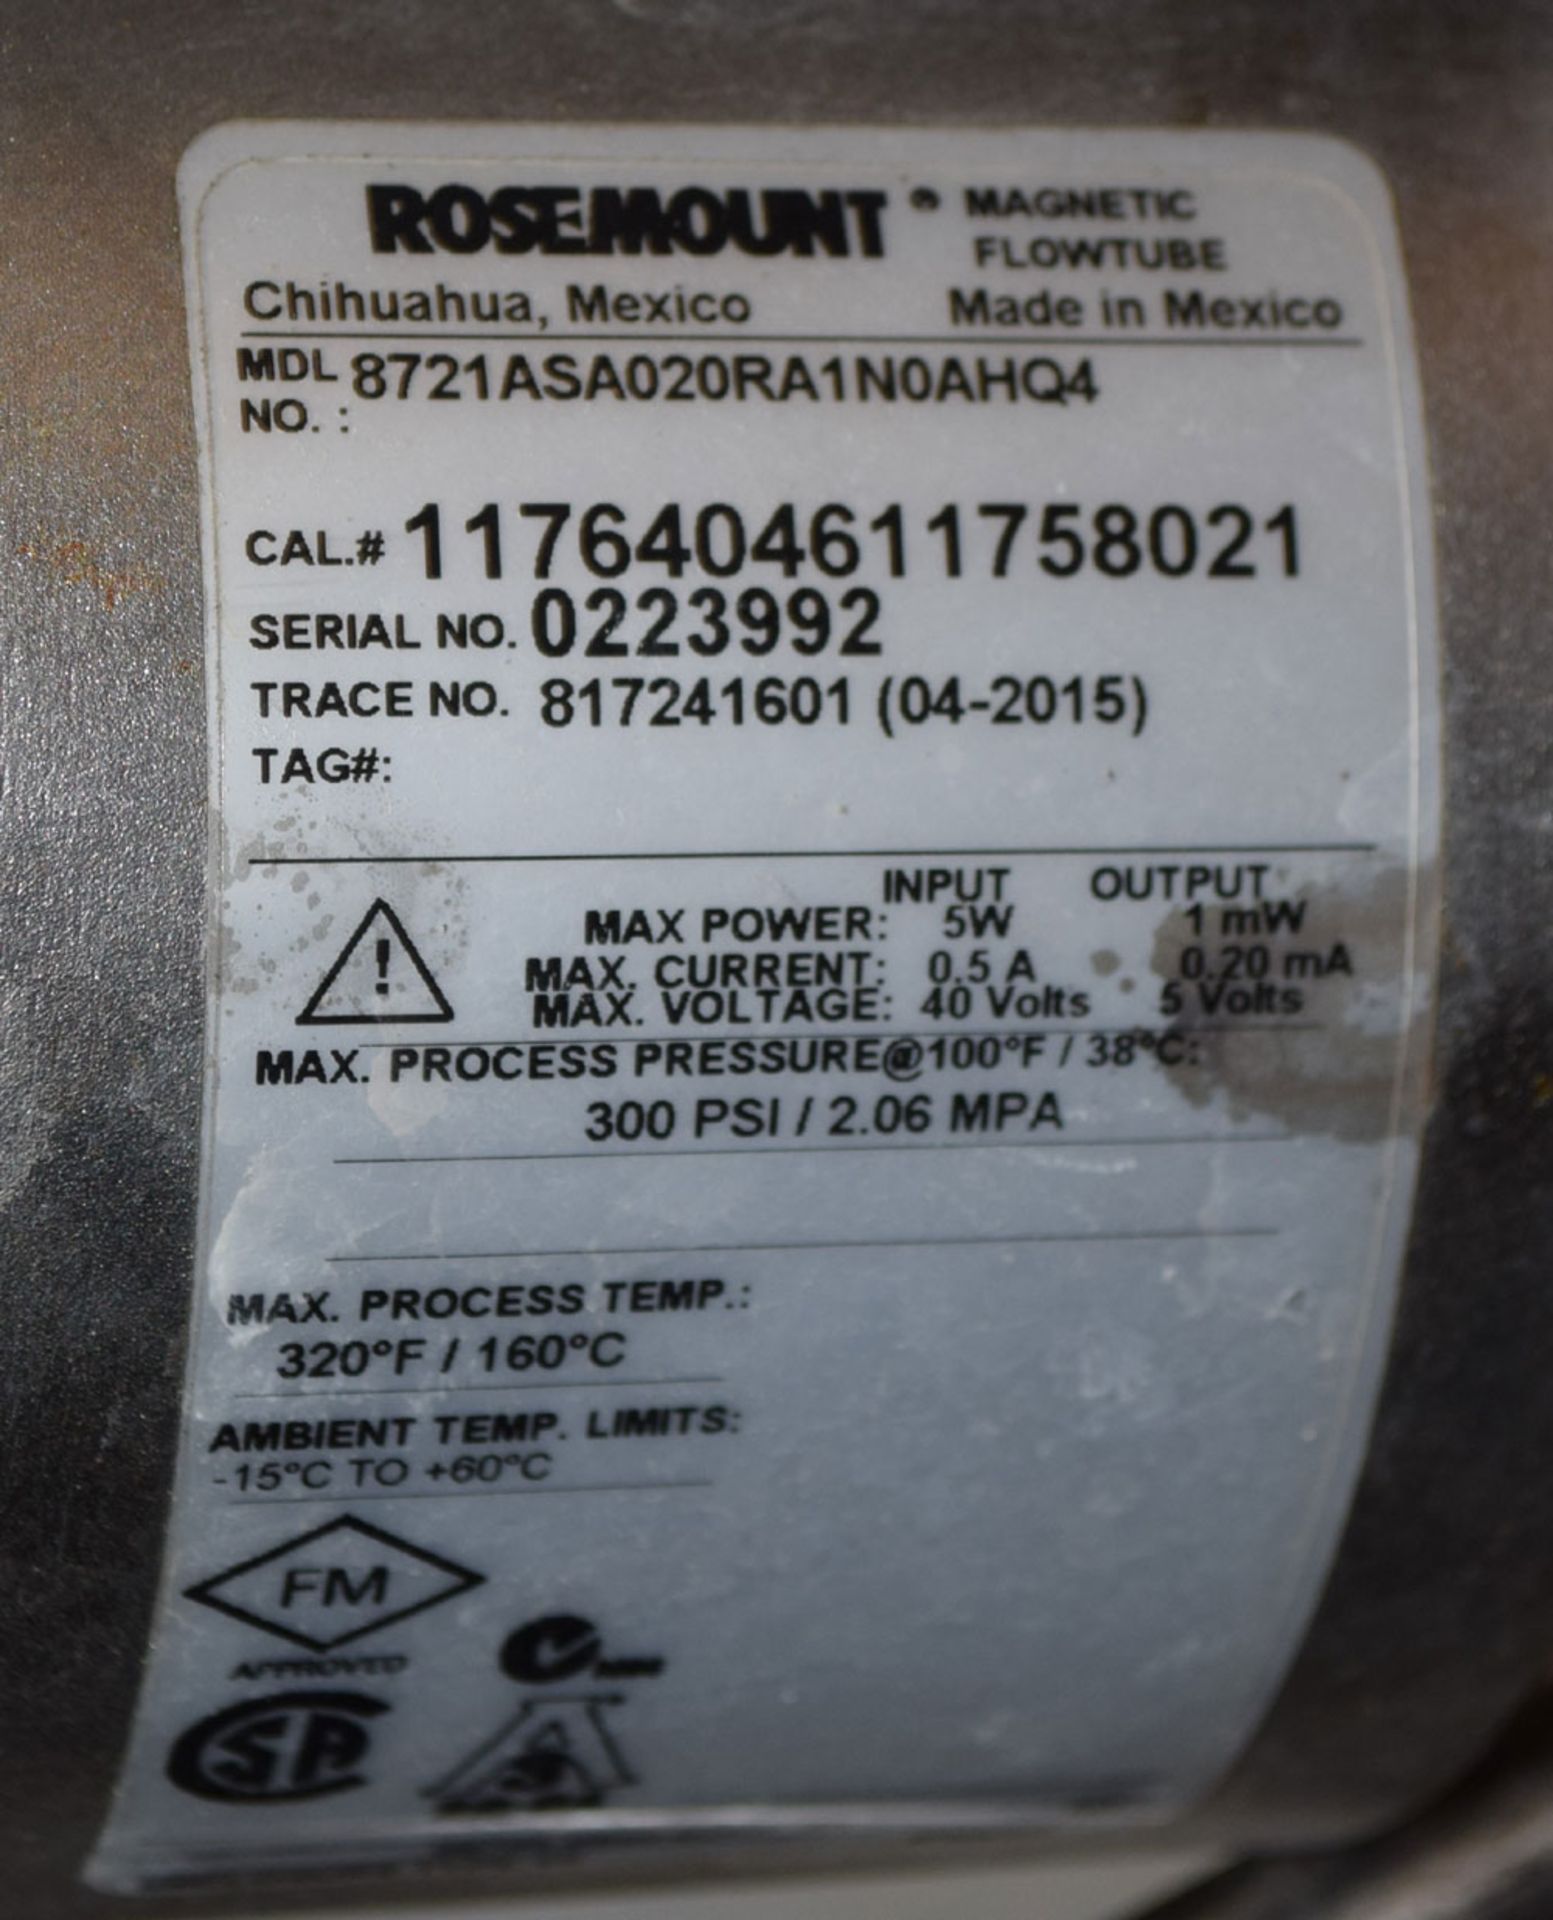 Rosemount 8721ASA020RA1N0AHQ4 Magnetic Flow Tube with Transmitter; s/n: 0223992 - Location in Plant: - Image 3 of 5